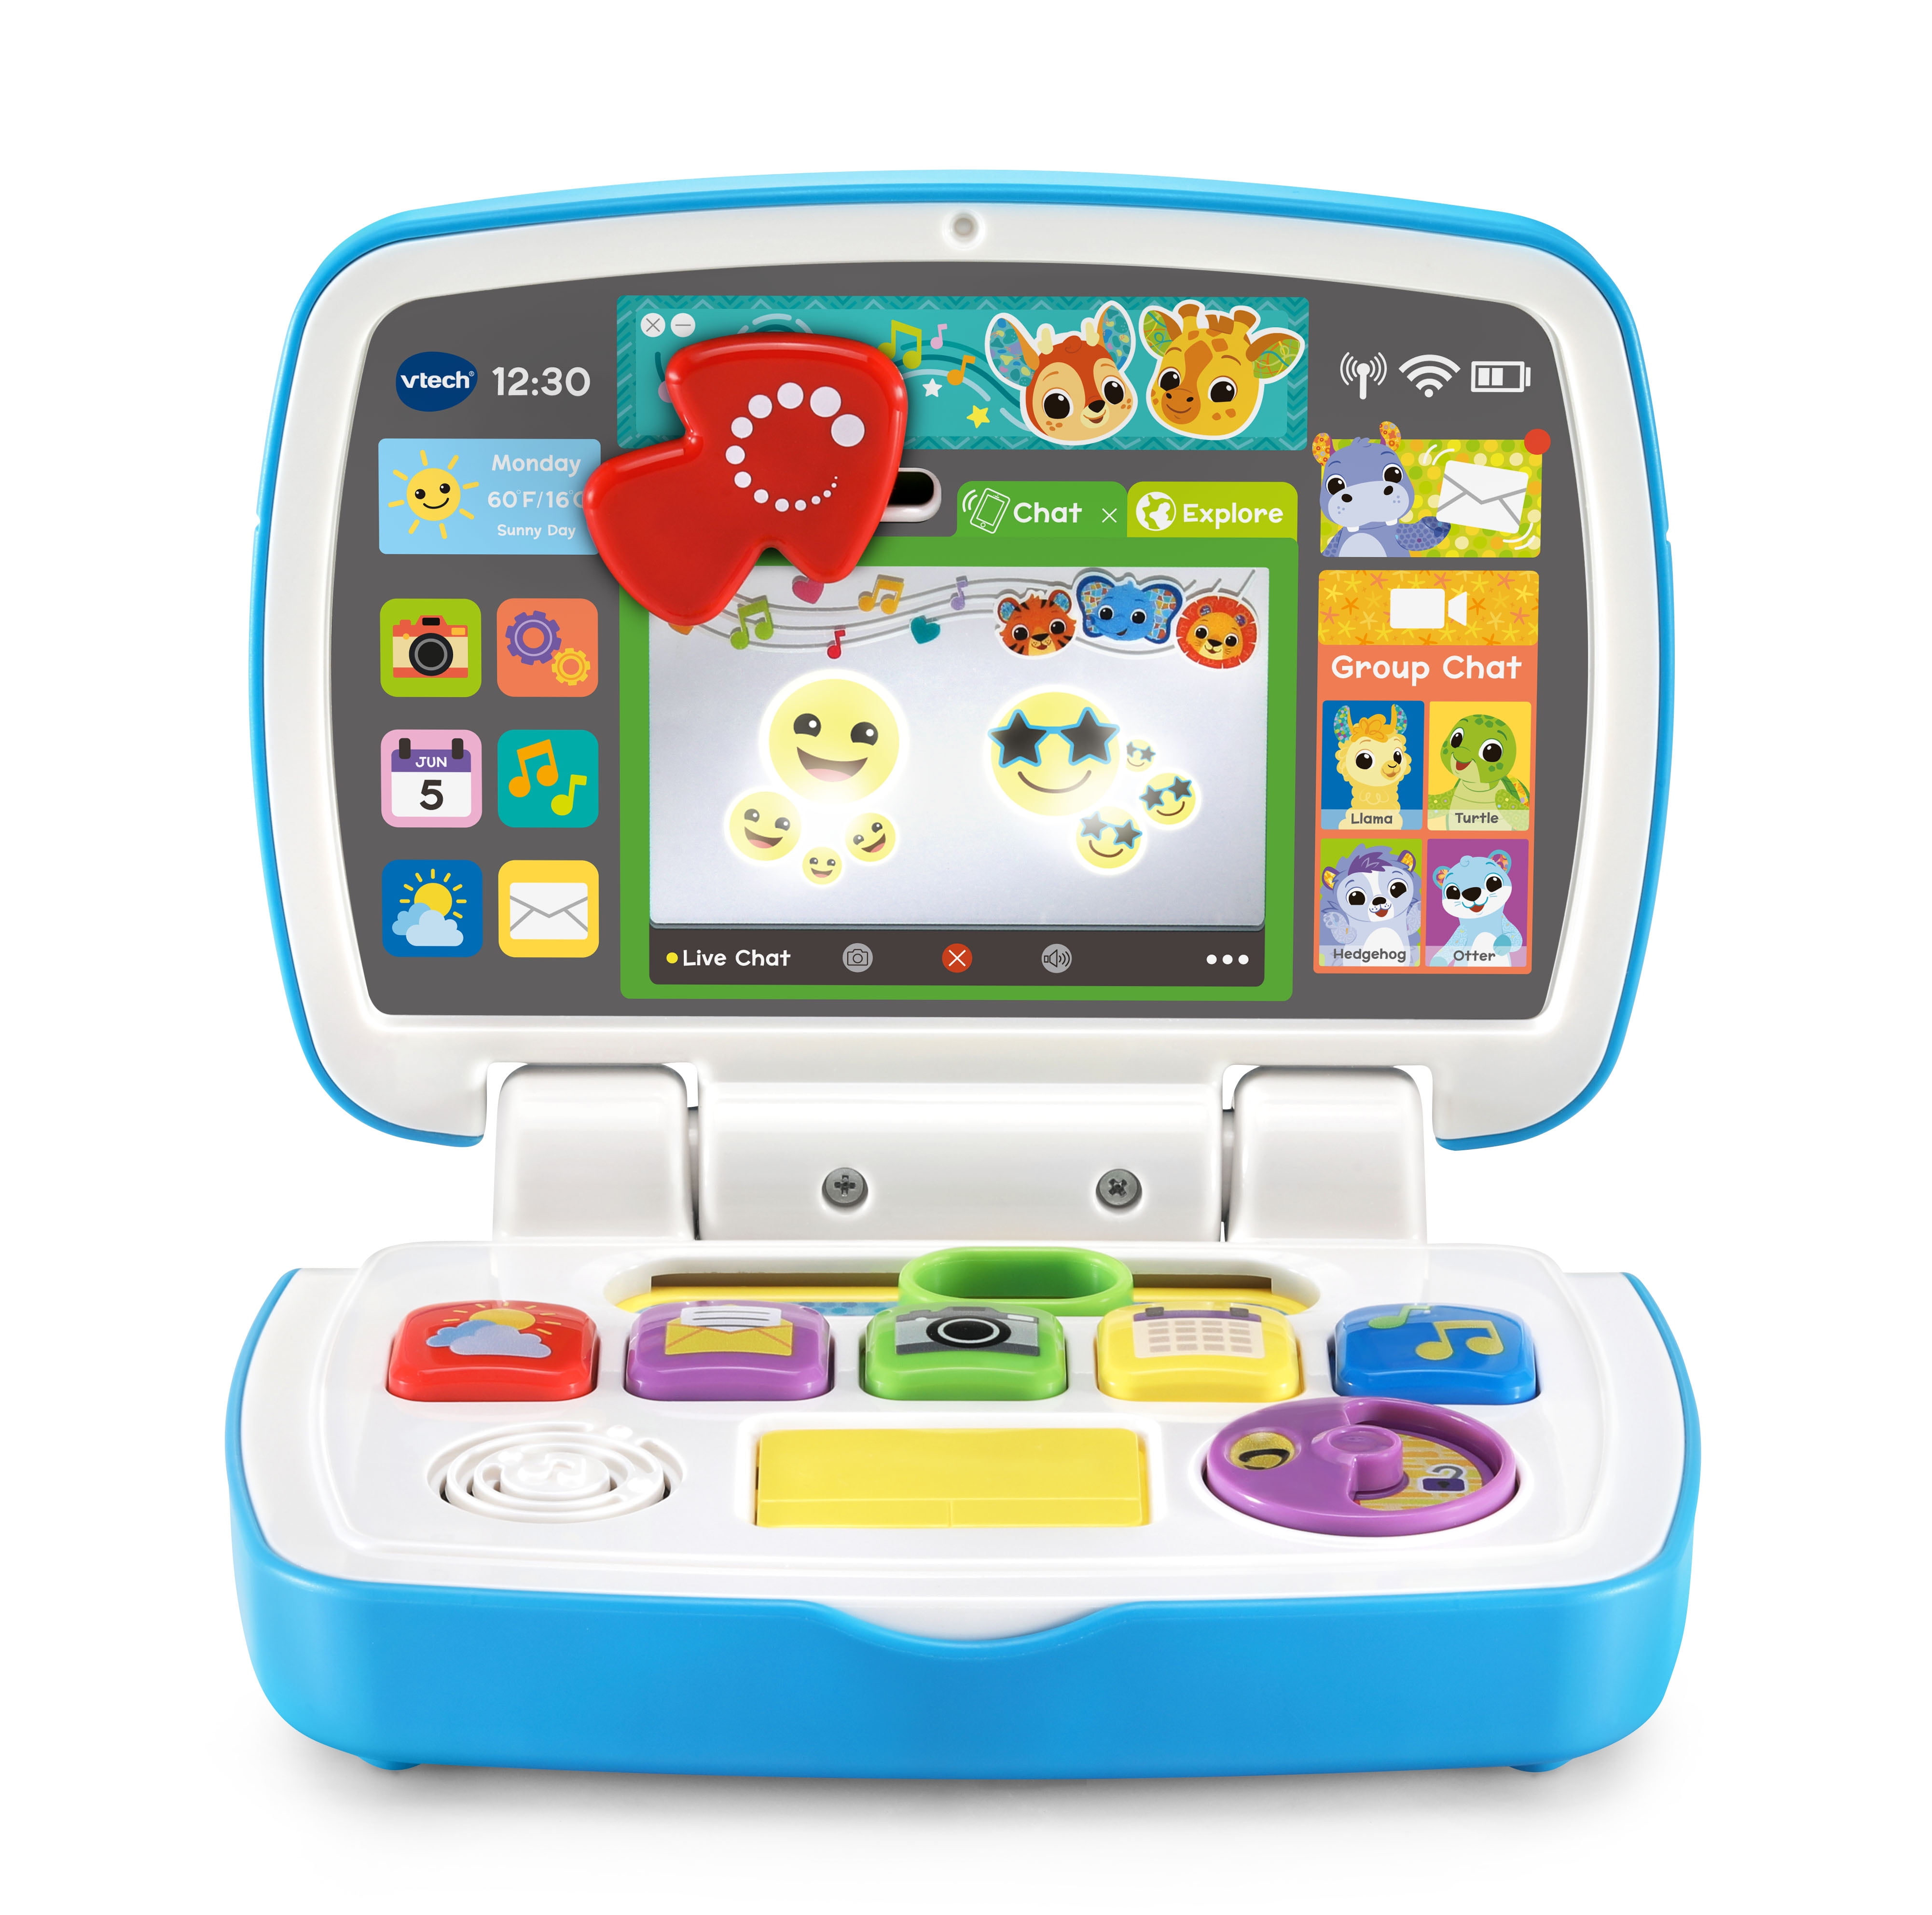 Vtech Baby's Learning Laptop Educational School Pink Purple Toy